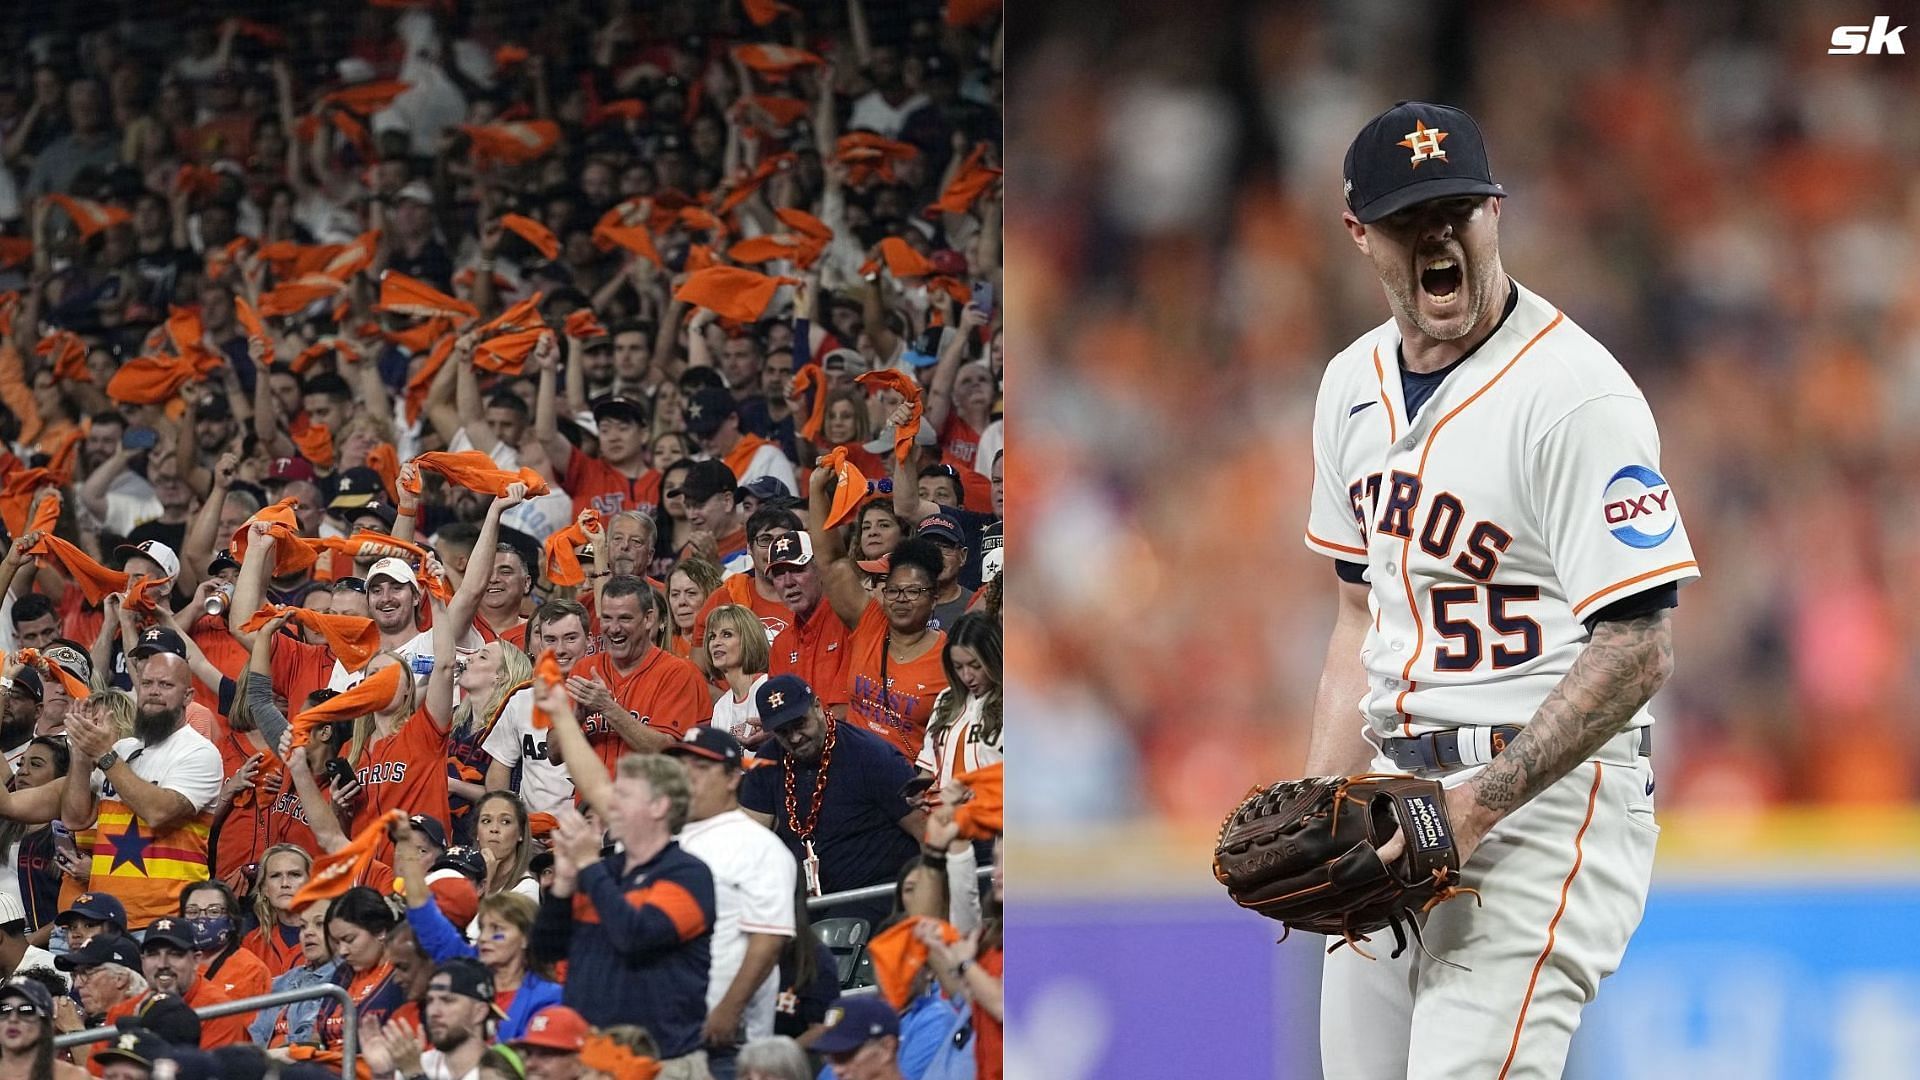 MLB fans disappointed with Houston Astros' fanbase as a brawl breaks out  between two supporters at Minute Maid Park: Typical houston